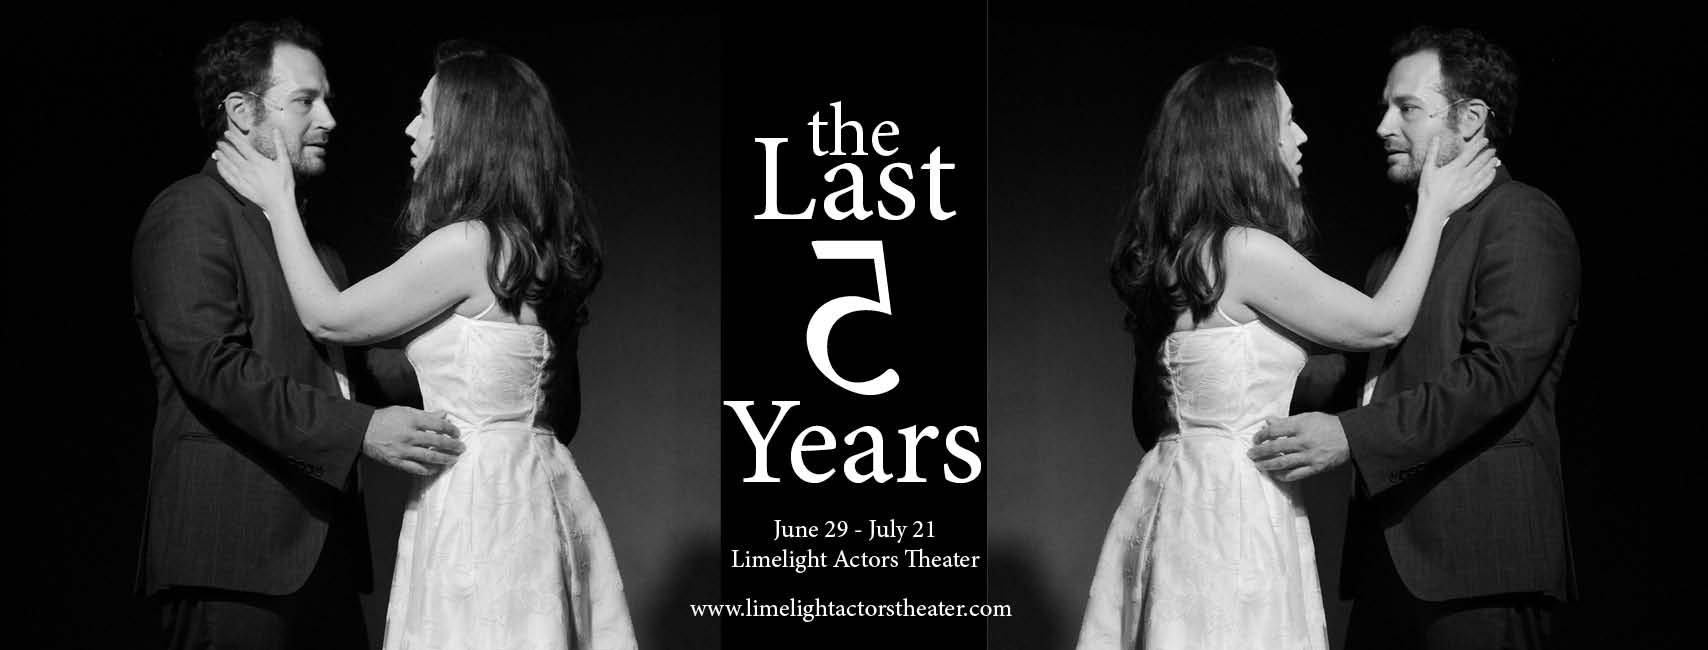 Curtain Up Theater Review By Camille Bounds The Last Five Years” Gilroy Life